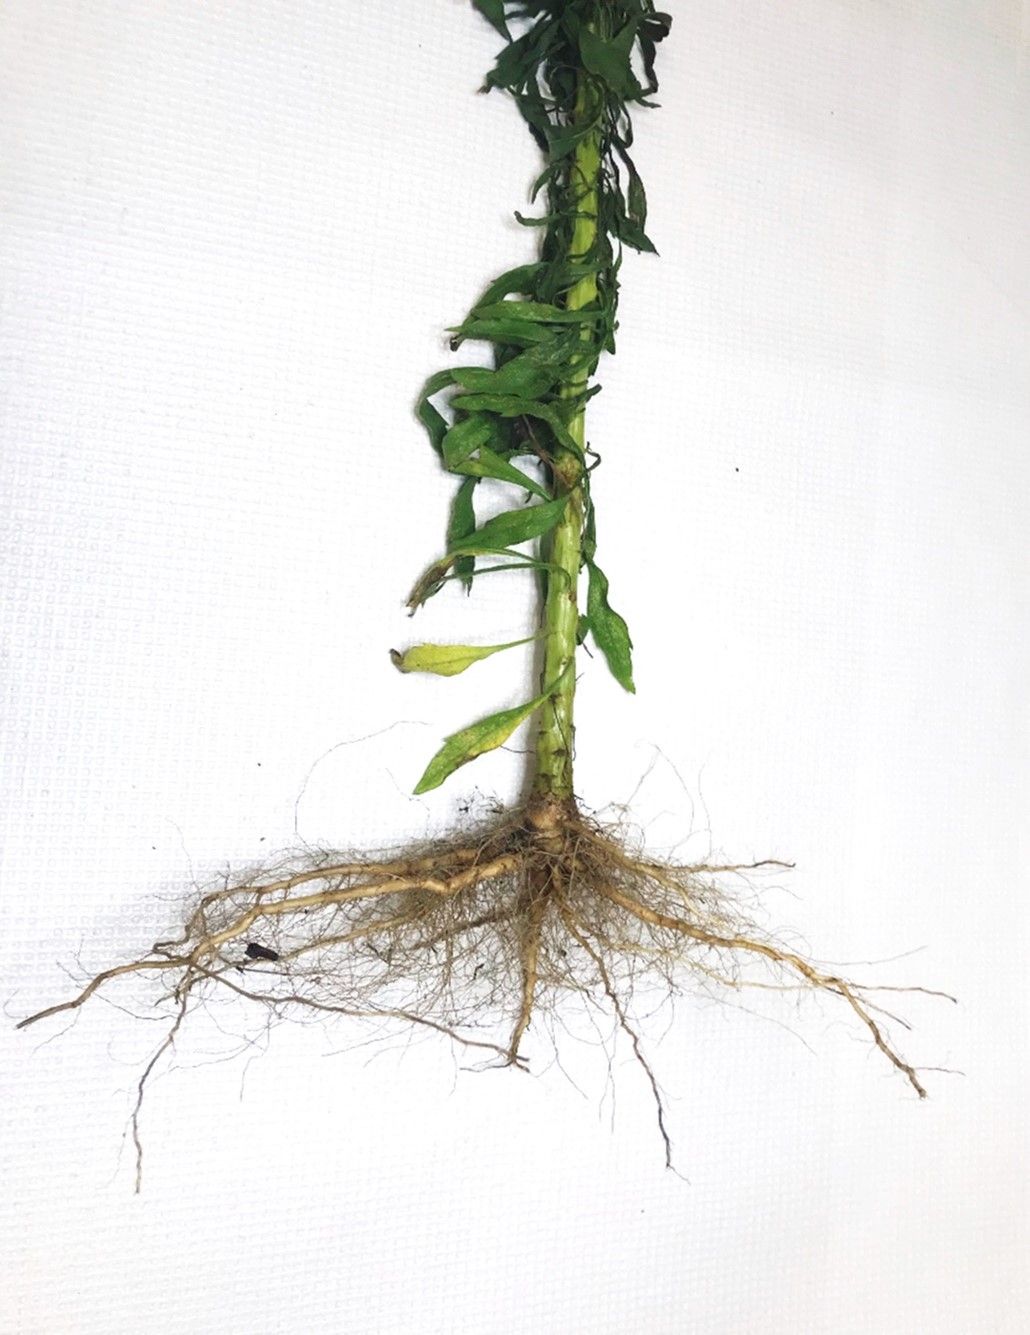 Horseweed roots from the central stem. 